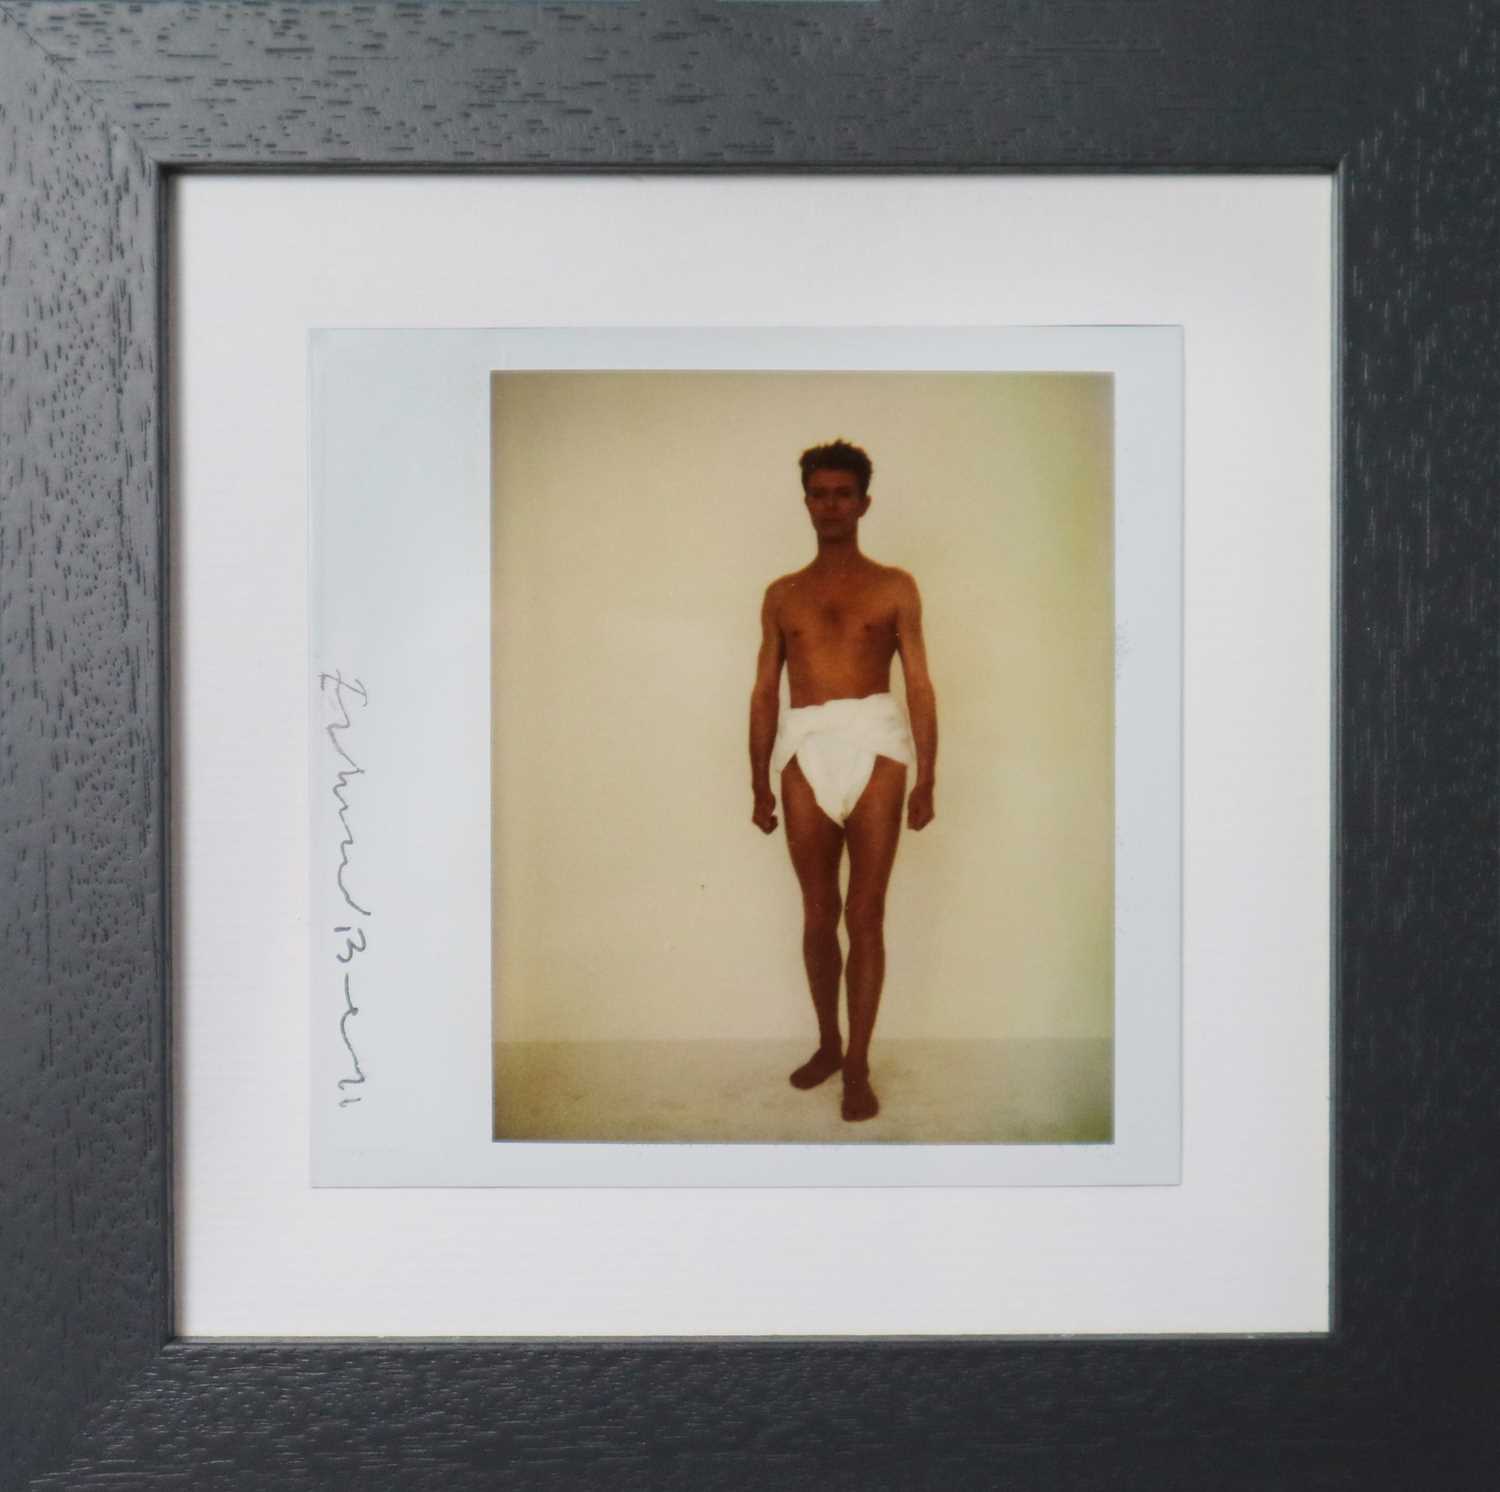 Edward Bell (British Contemporary) Polaroid of David Bowie in a Toga - Image 2 of 3